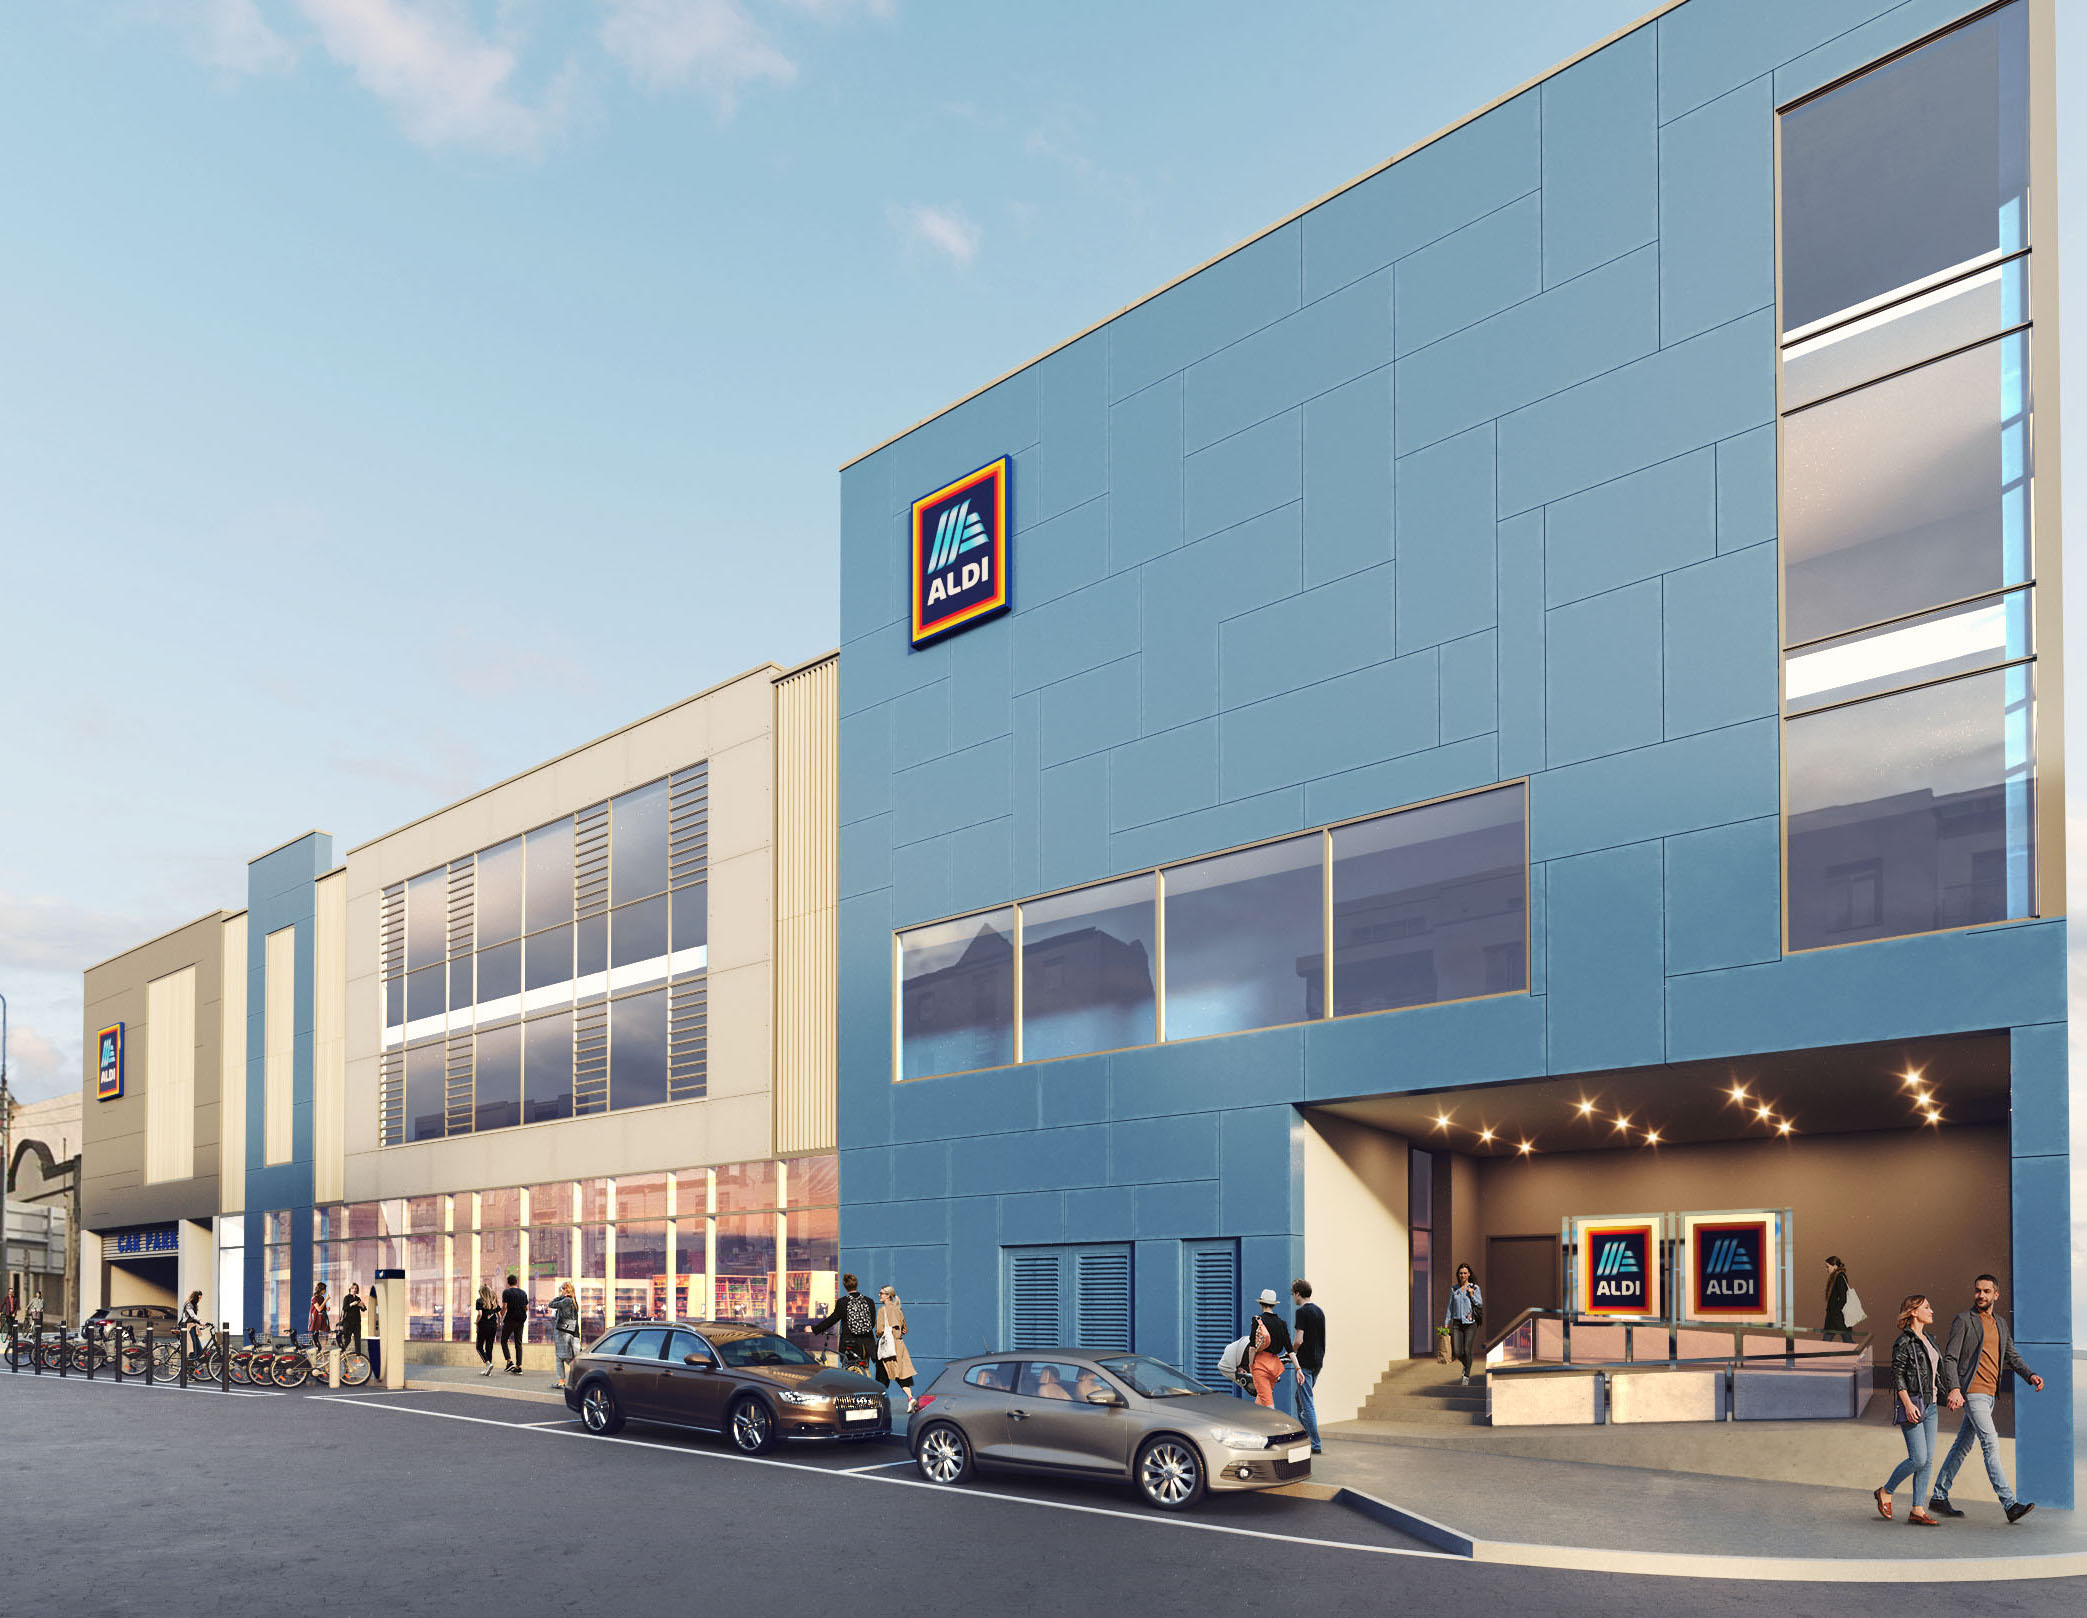 Aldi Limerick store - over 100 new jobs are promised. An artists rendition fo the proposed store abov